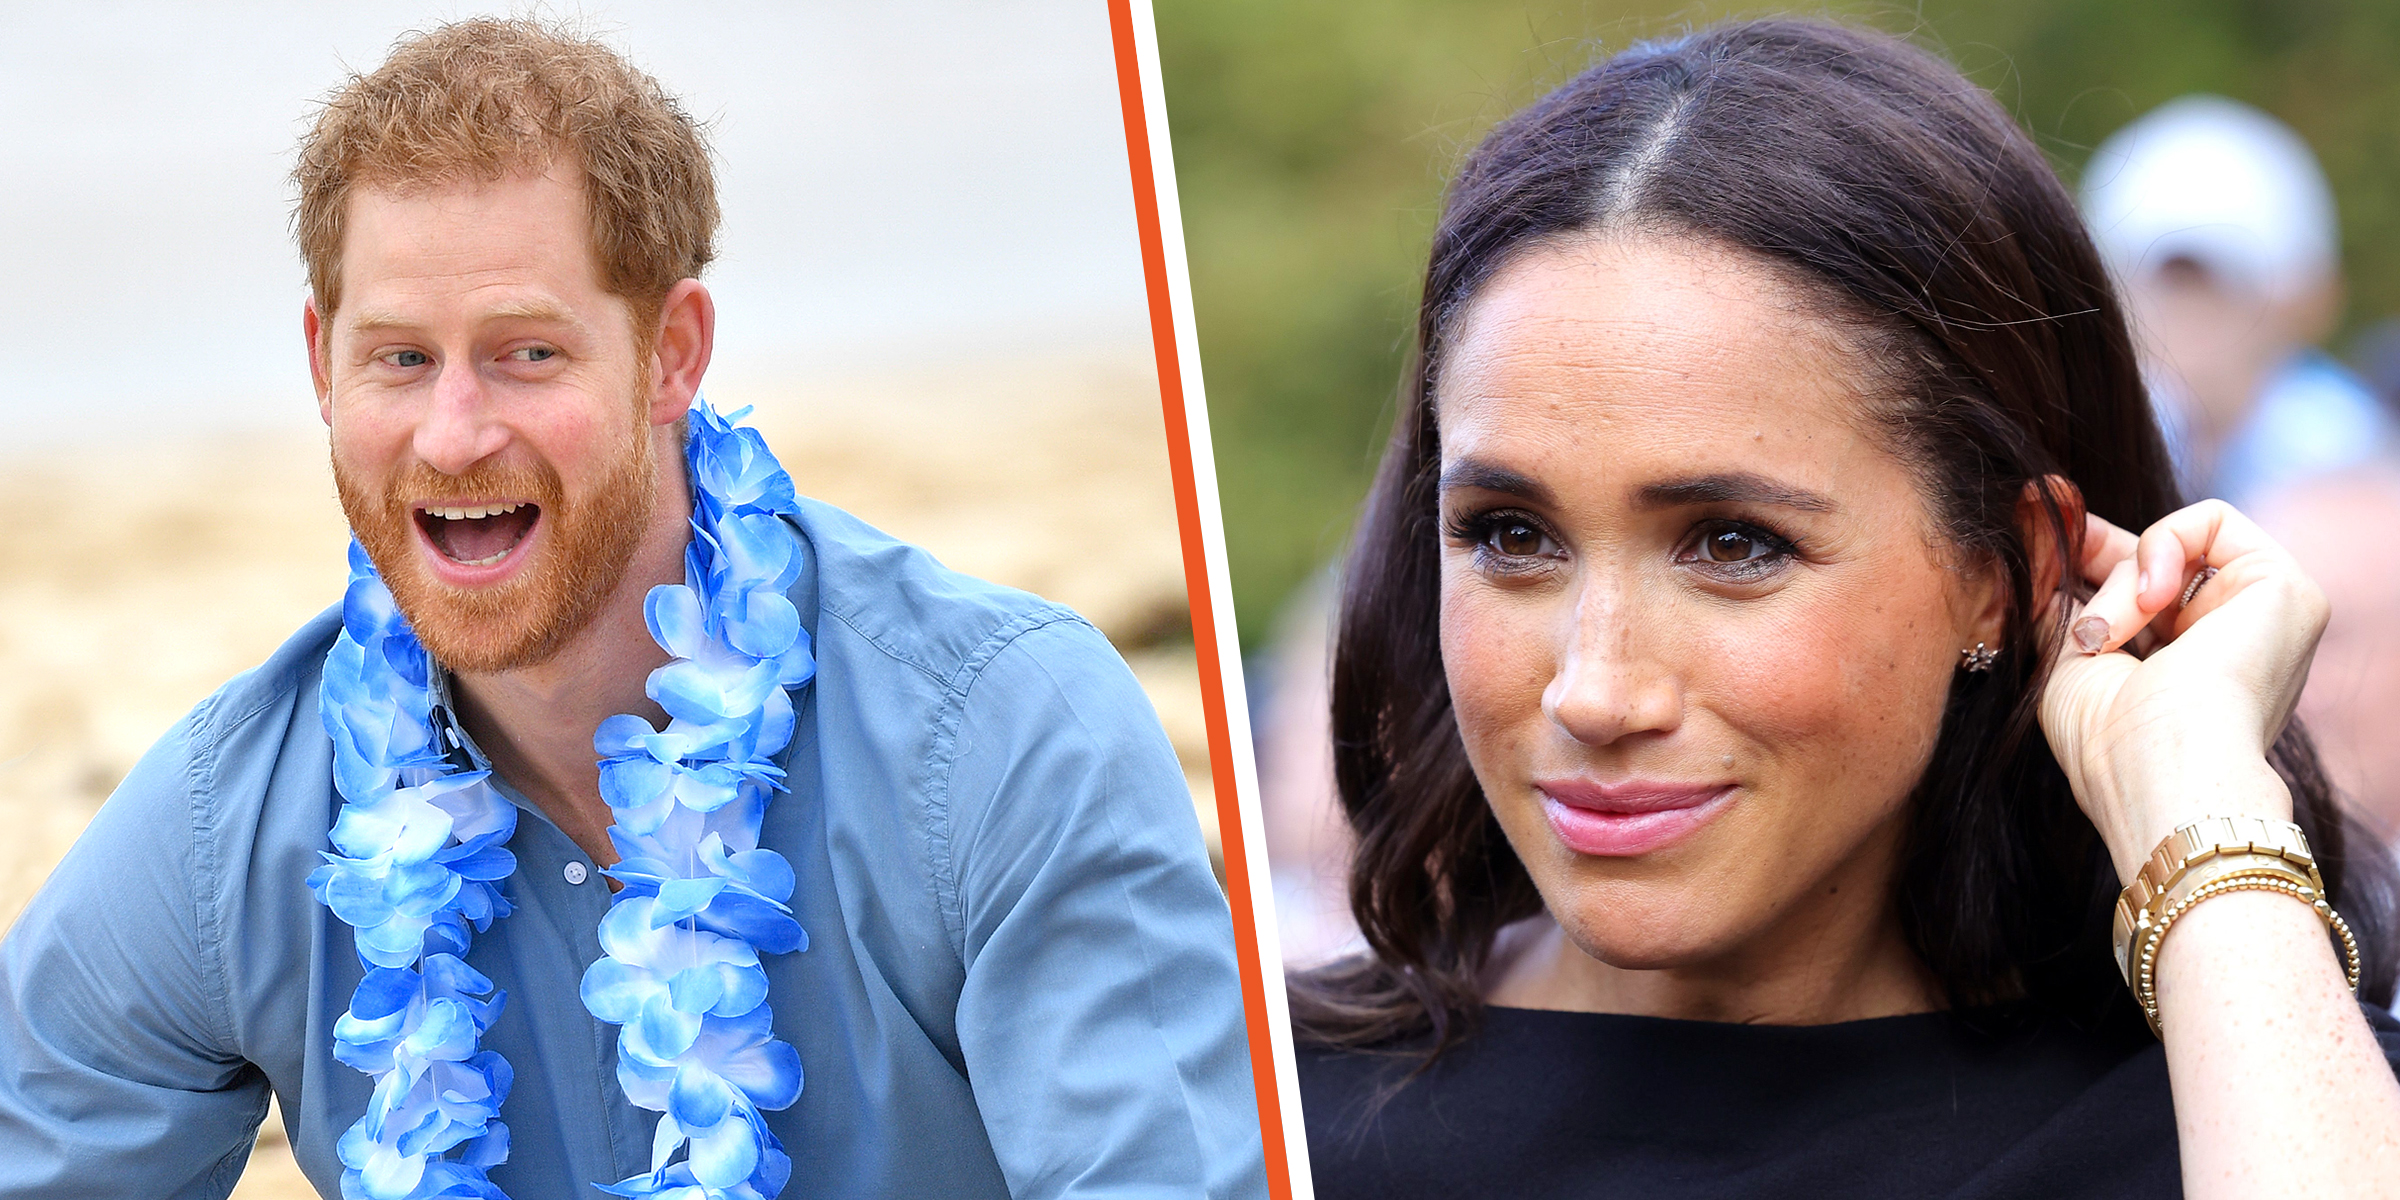 Prince Harry, Duke of Sussex. | Meghan Markle, Duchess of Sussex. | Source: Getty Images | twitter.com@RNN_RoyalNews